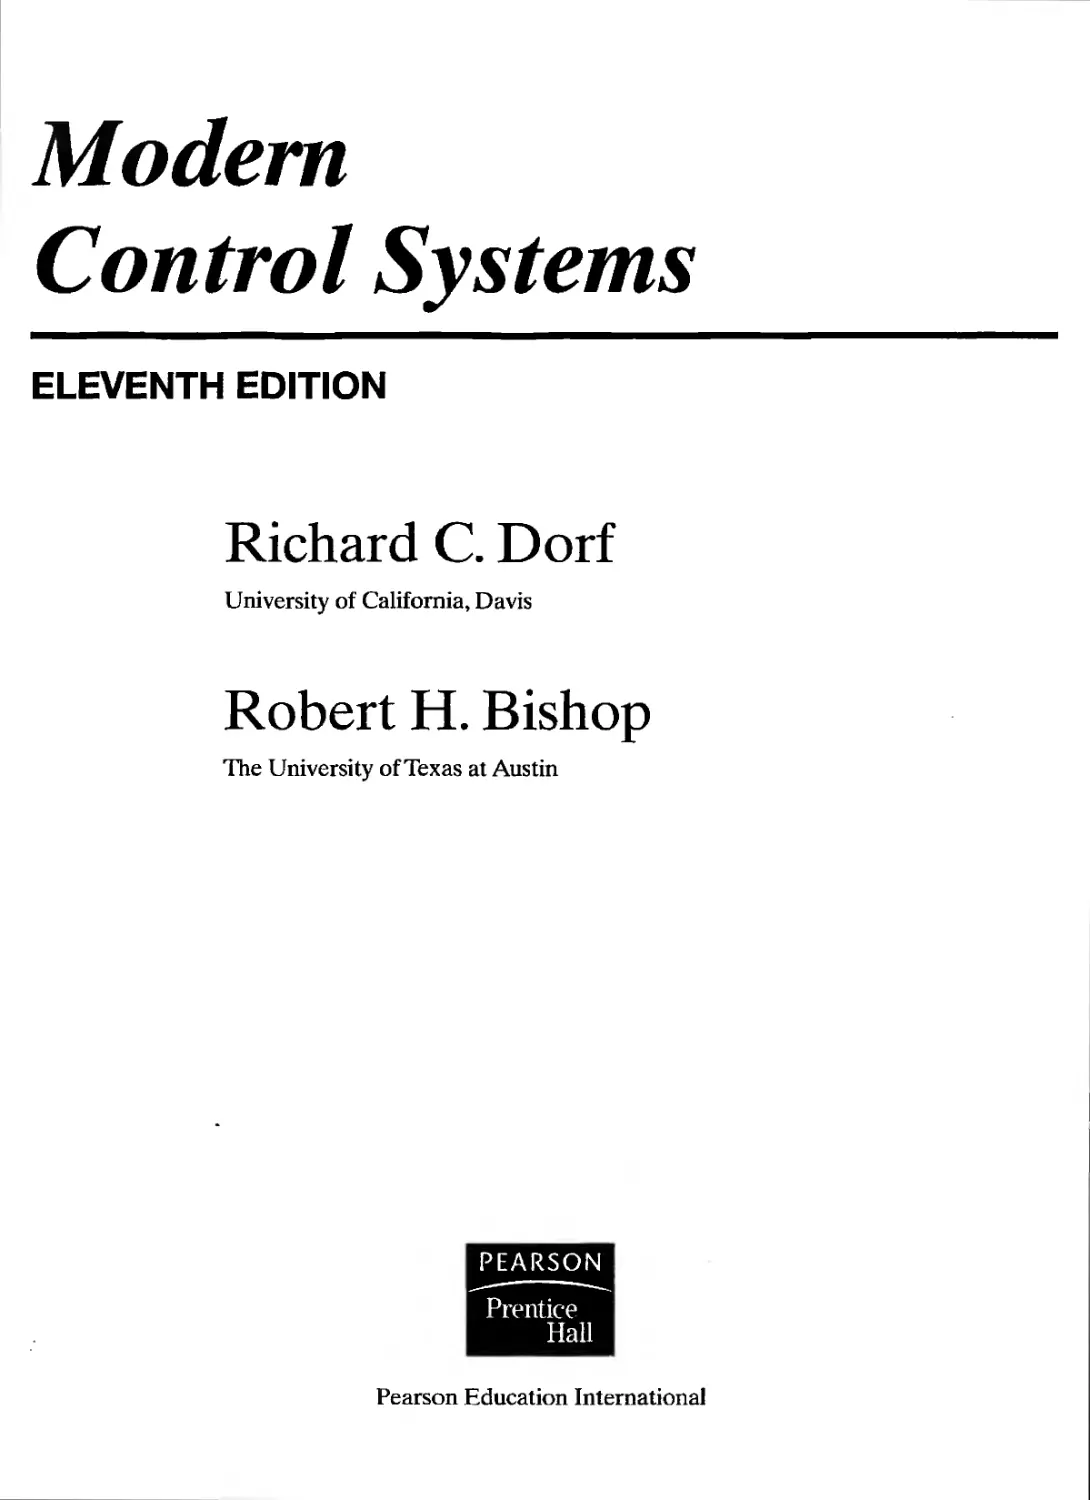 Title: Modern Control Systems